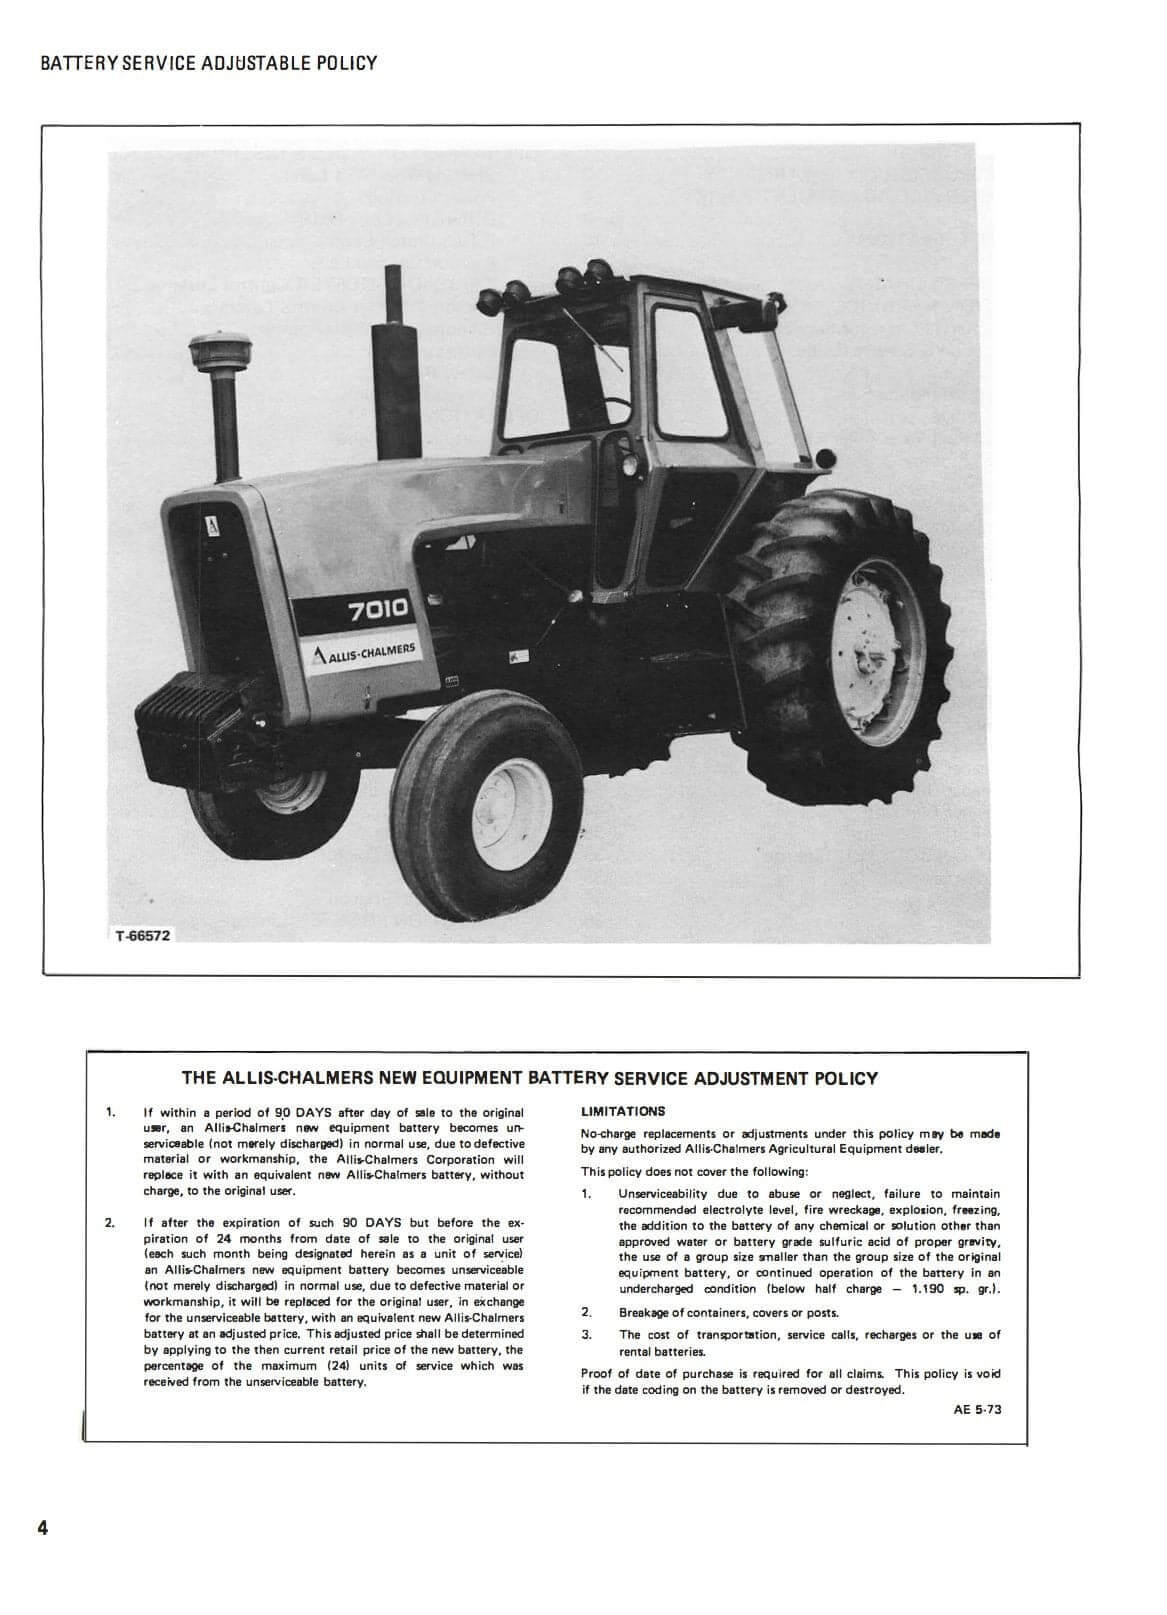 Allis-Chalmers 7010 Diesel Tractor - Operator's Manual - Ag Manuals - A Provider of Digital Farm Manuals - 2